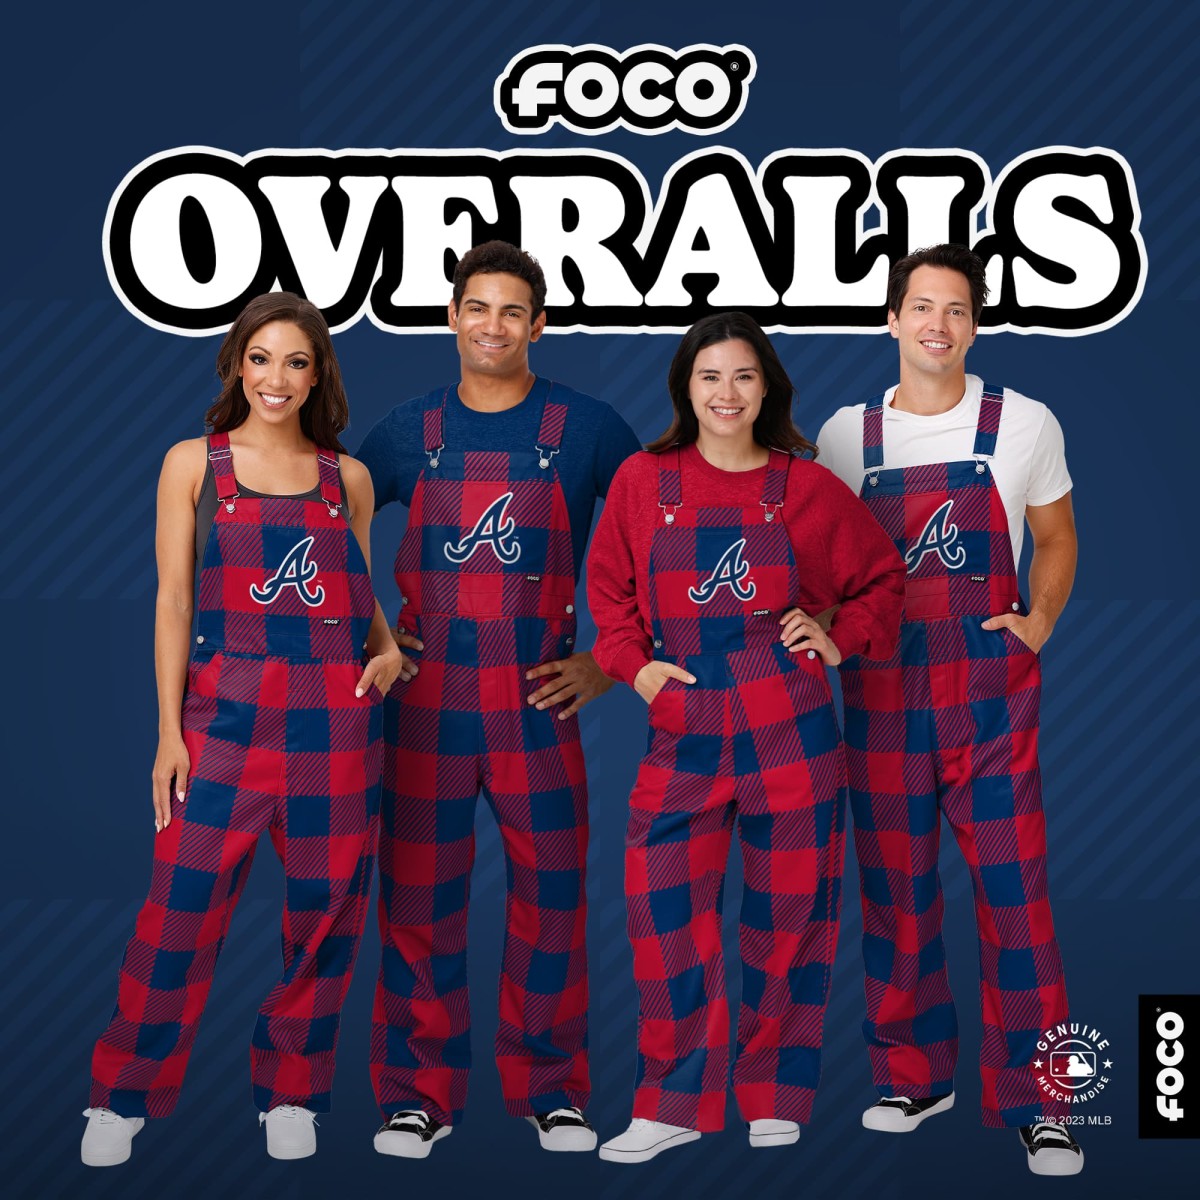 Braves overalls from FOCO